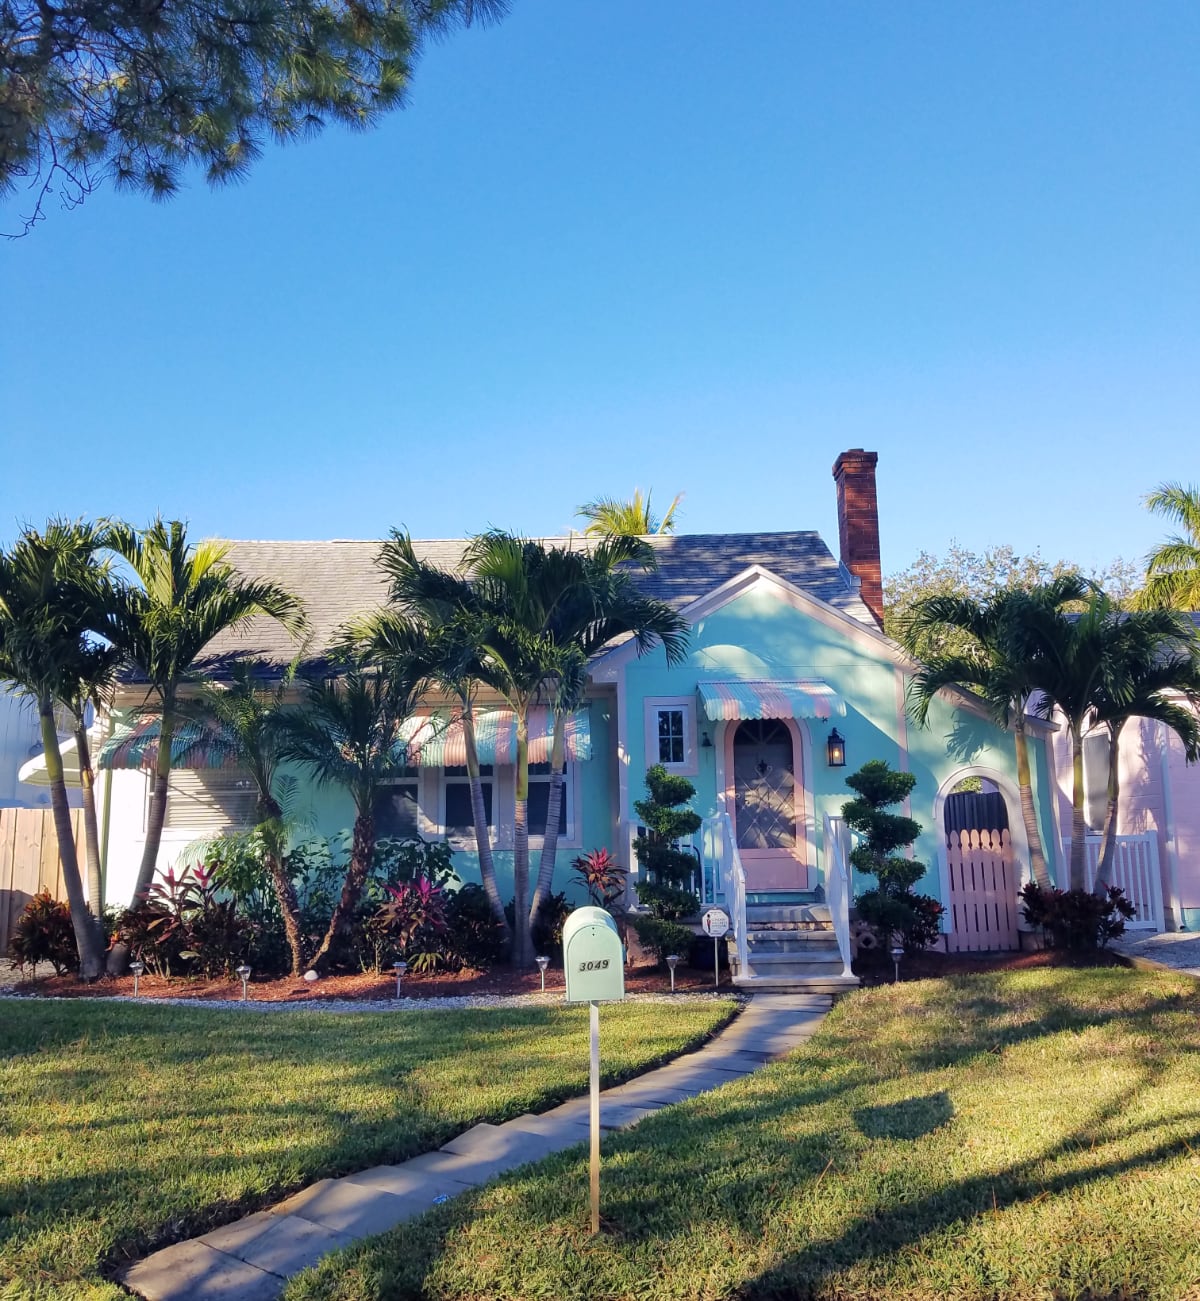 A sweet turquoise cottage with pink trim in Gulfport Florida
